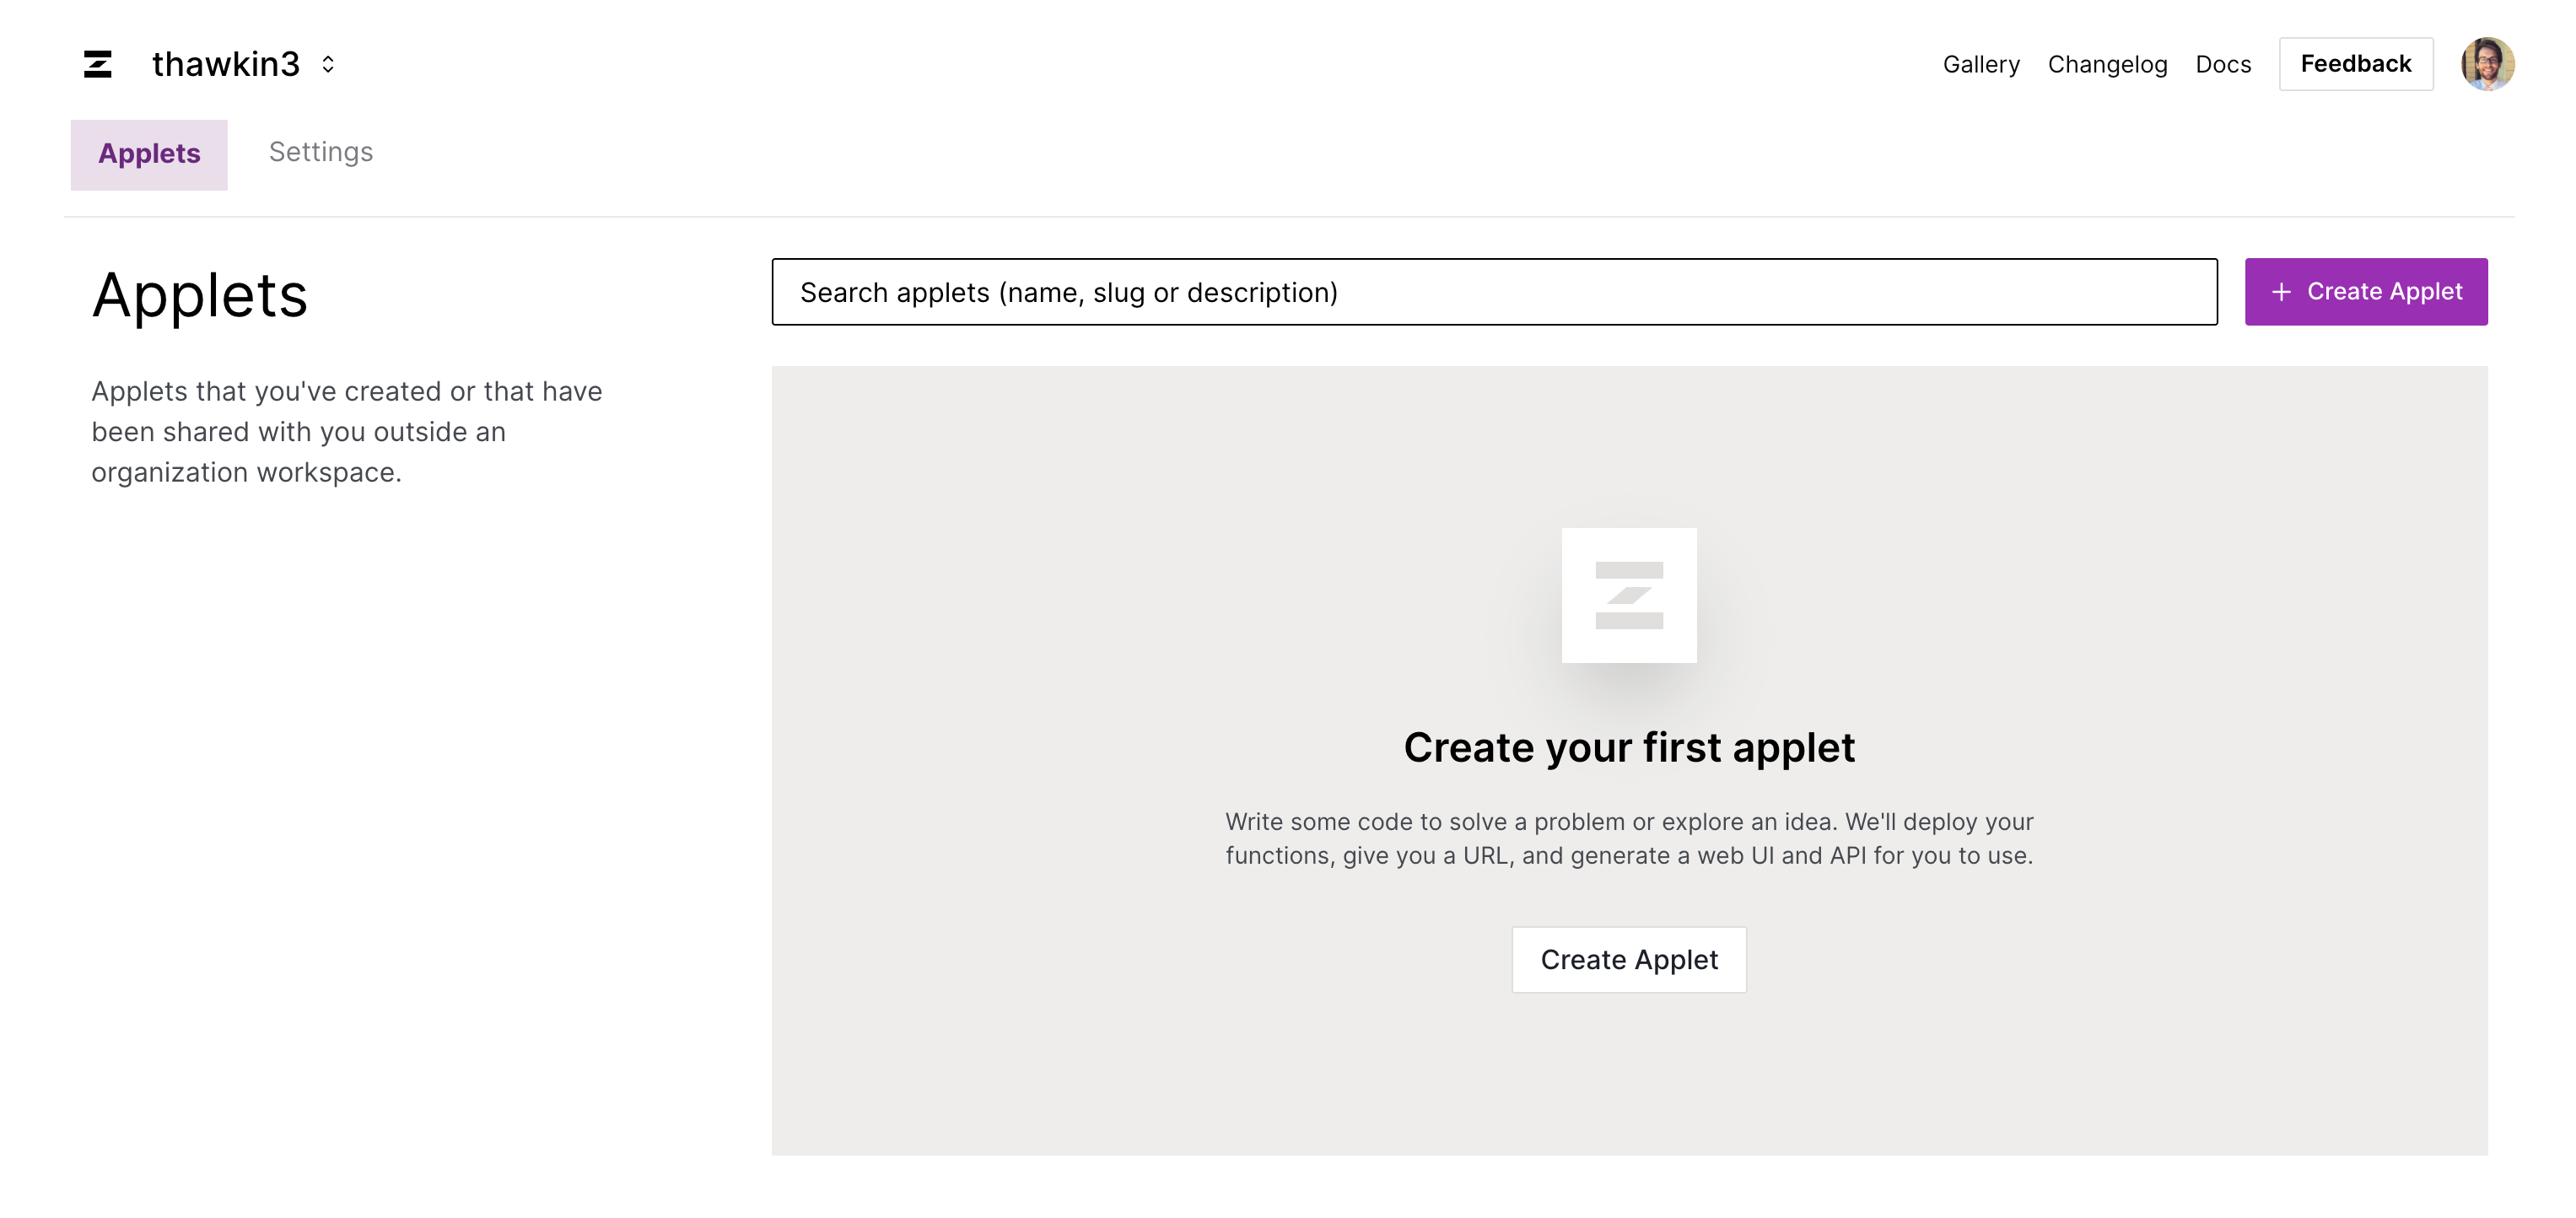 Create your first applet